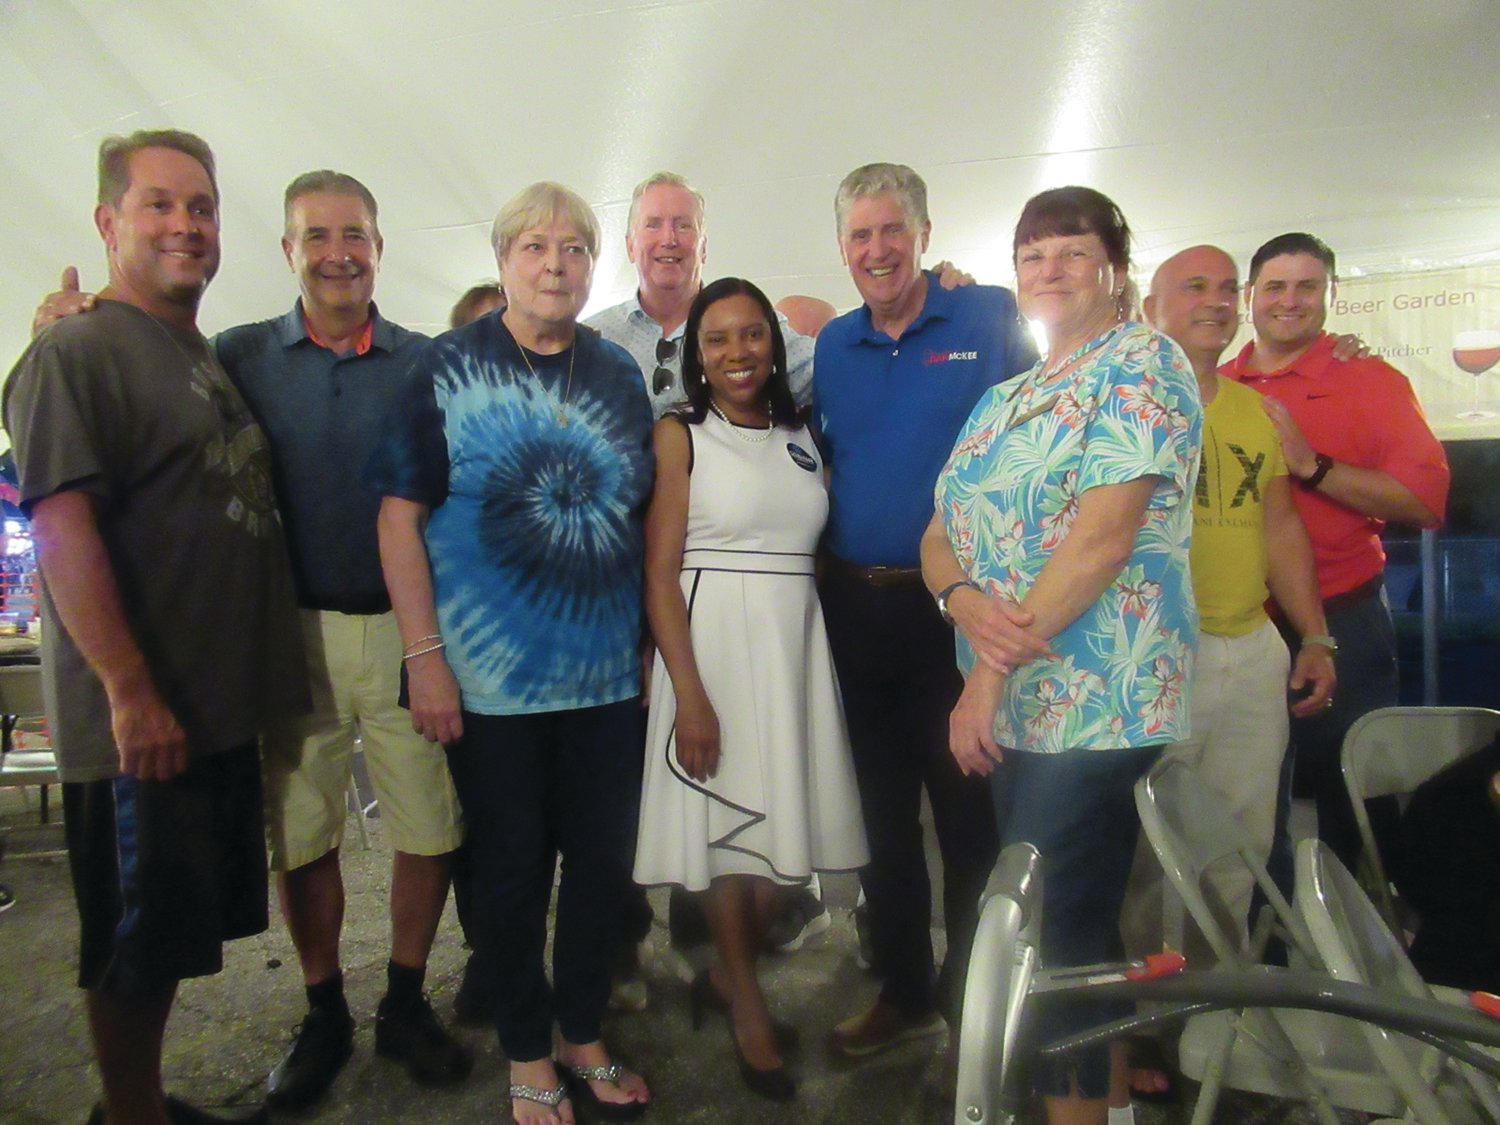 FESTIVAL FUN: Gov. Dan McKee, Lt. Gov. Sabina Matos, Cranston Mayor Ken Hopkins, Sen. Frank Lombardo and Councilwoman Linda Folcarelli, Dave Pingitore, Marty Church and Richard DelFino III are among the hundreds of took in the fun and food-filled record-setting St. Rocco’s Feast and Festival last Friday night in Johnston.